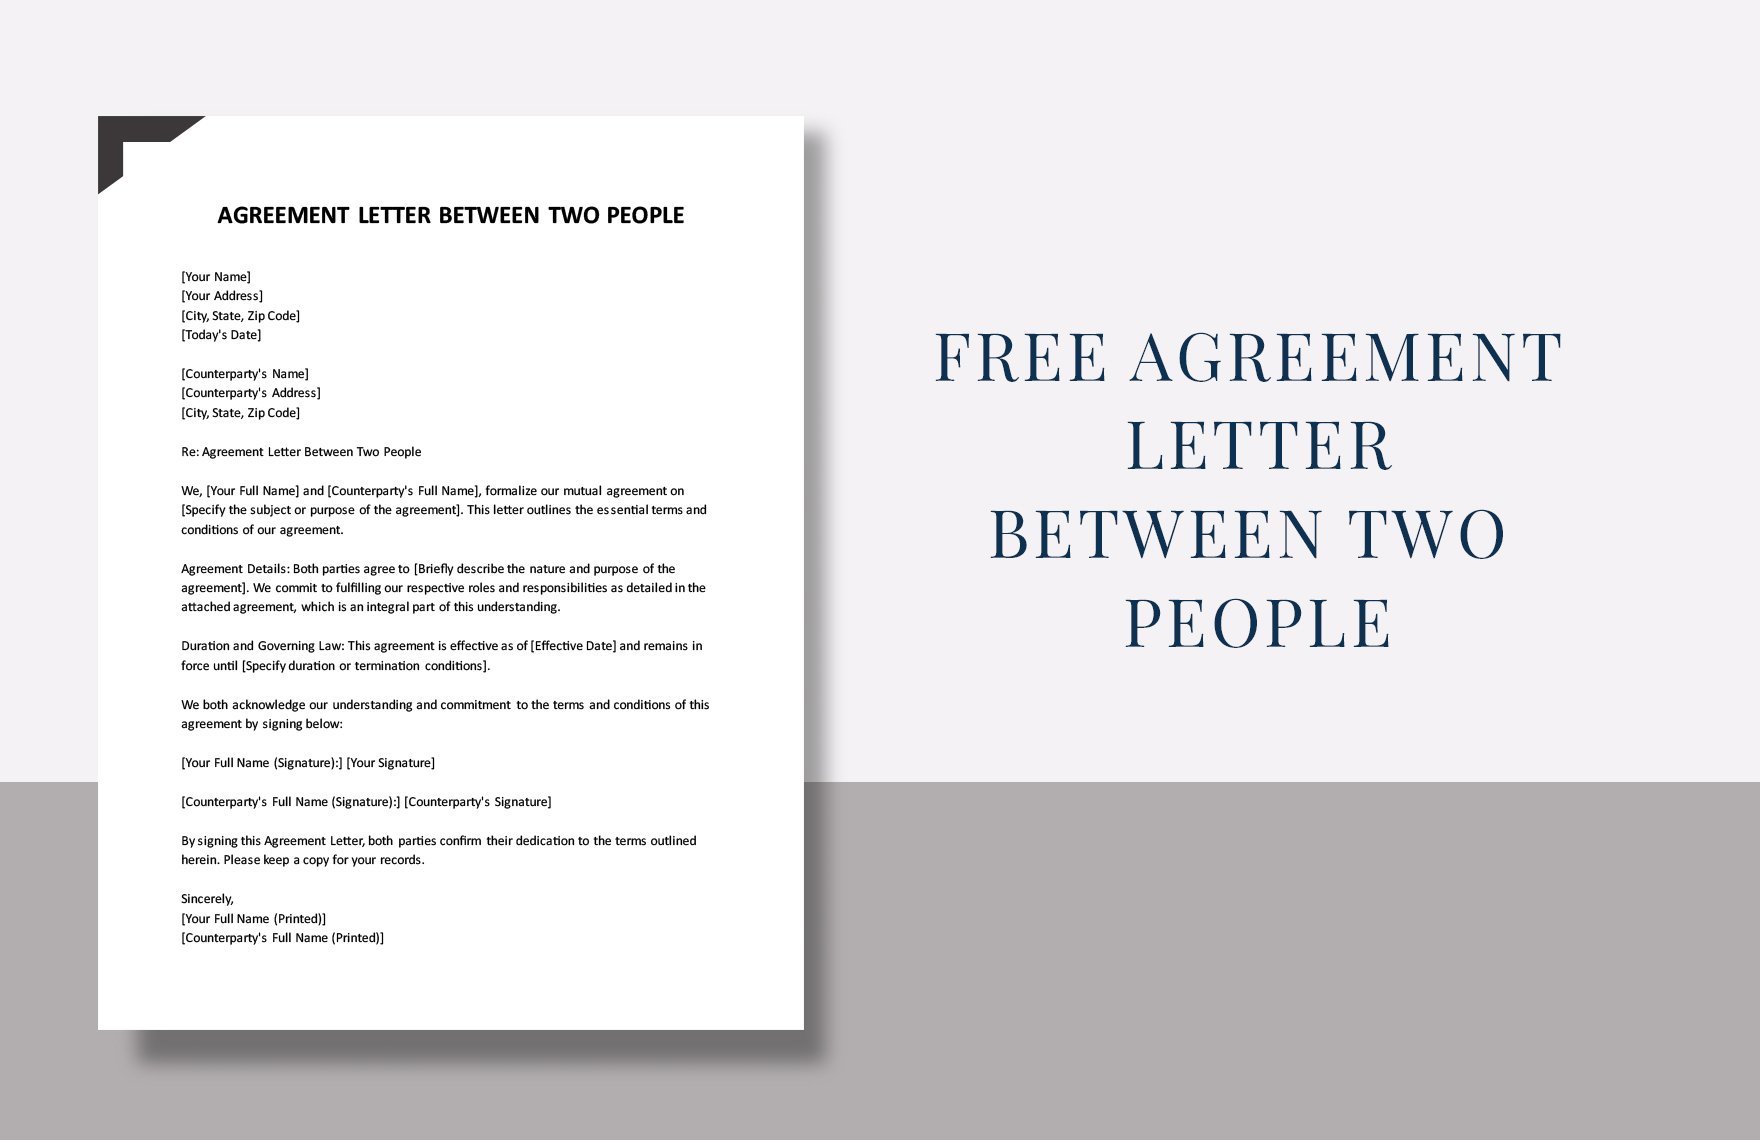 Agreement Letter Between Two People